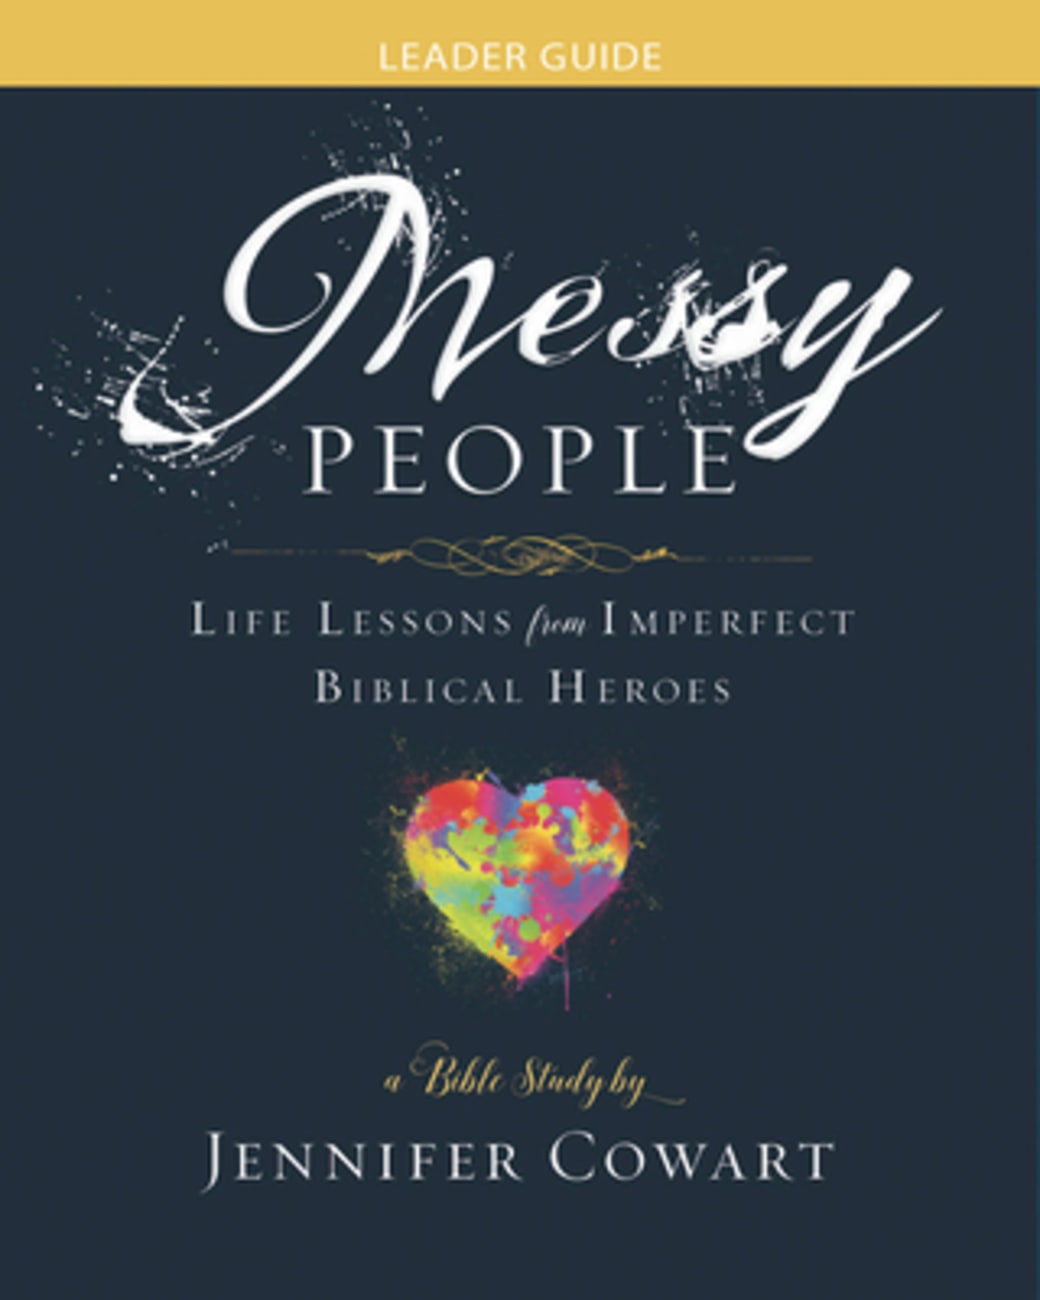 Messy People Women's Bible Study: Life Lessons From Imperfect Biblical Heroes (Leader Guide) Paperback